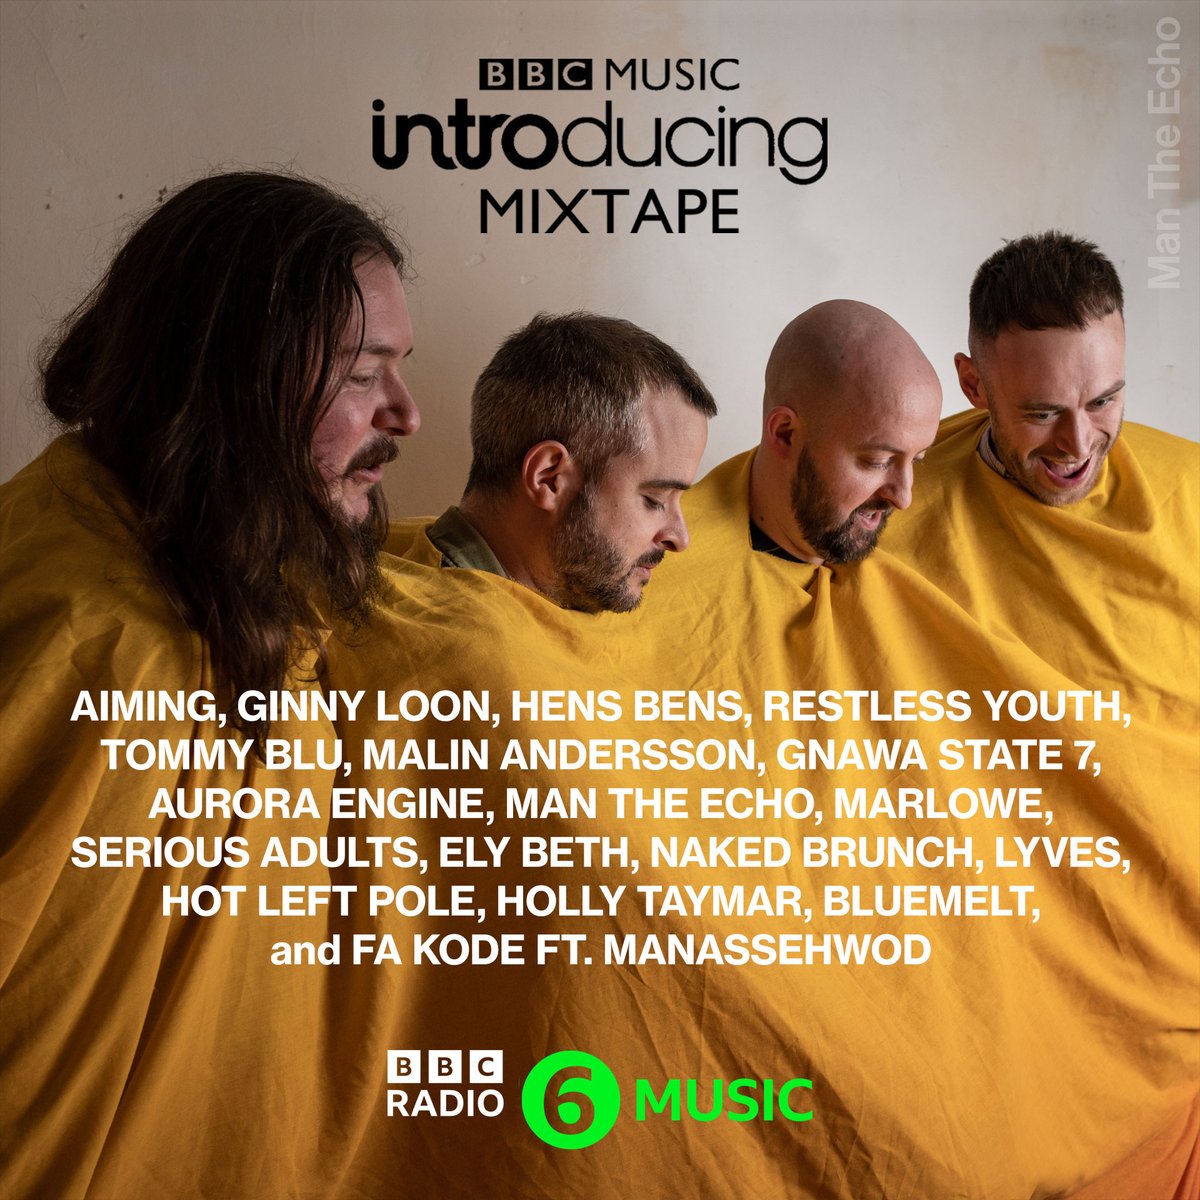 My next @bbcintroducing Mixtape drops this Mon 19 Feb on all platforms inc @BBCSounds & on @BBC6Music. See bbc.co.uk/blogs/introduc… for full playlist. For full list of artists & tracks see Alt Text on picture. With thanks to @Dave_Monks @mattplumb3 @JerichoKeys #DeclanVink...